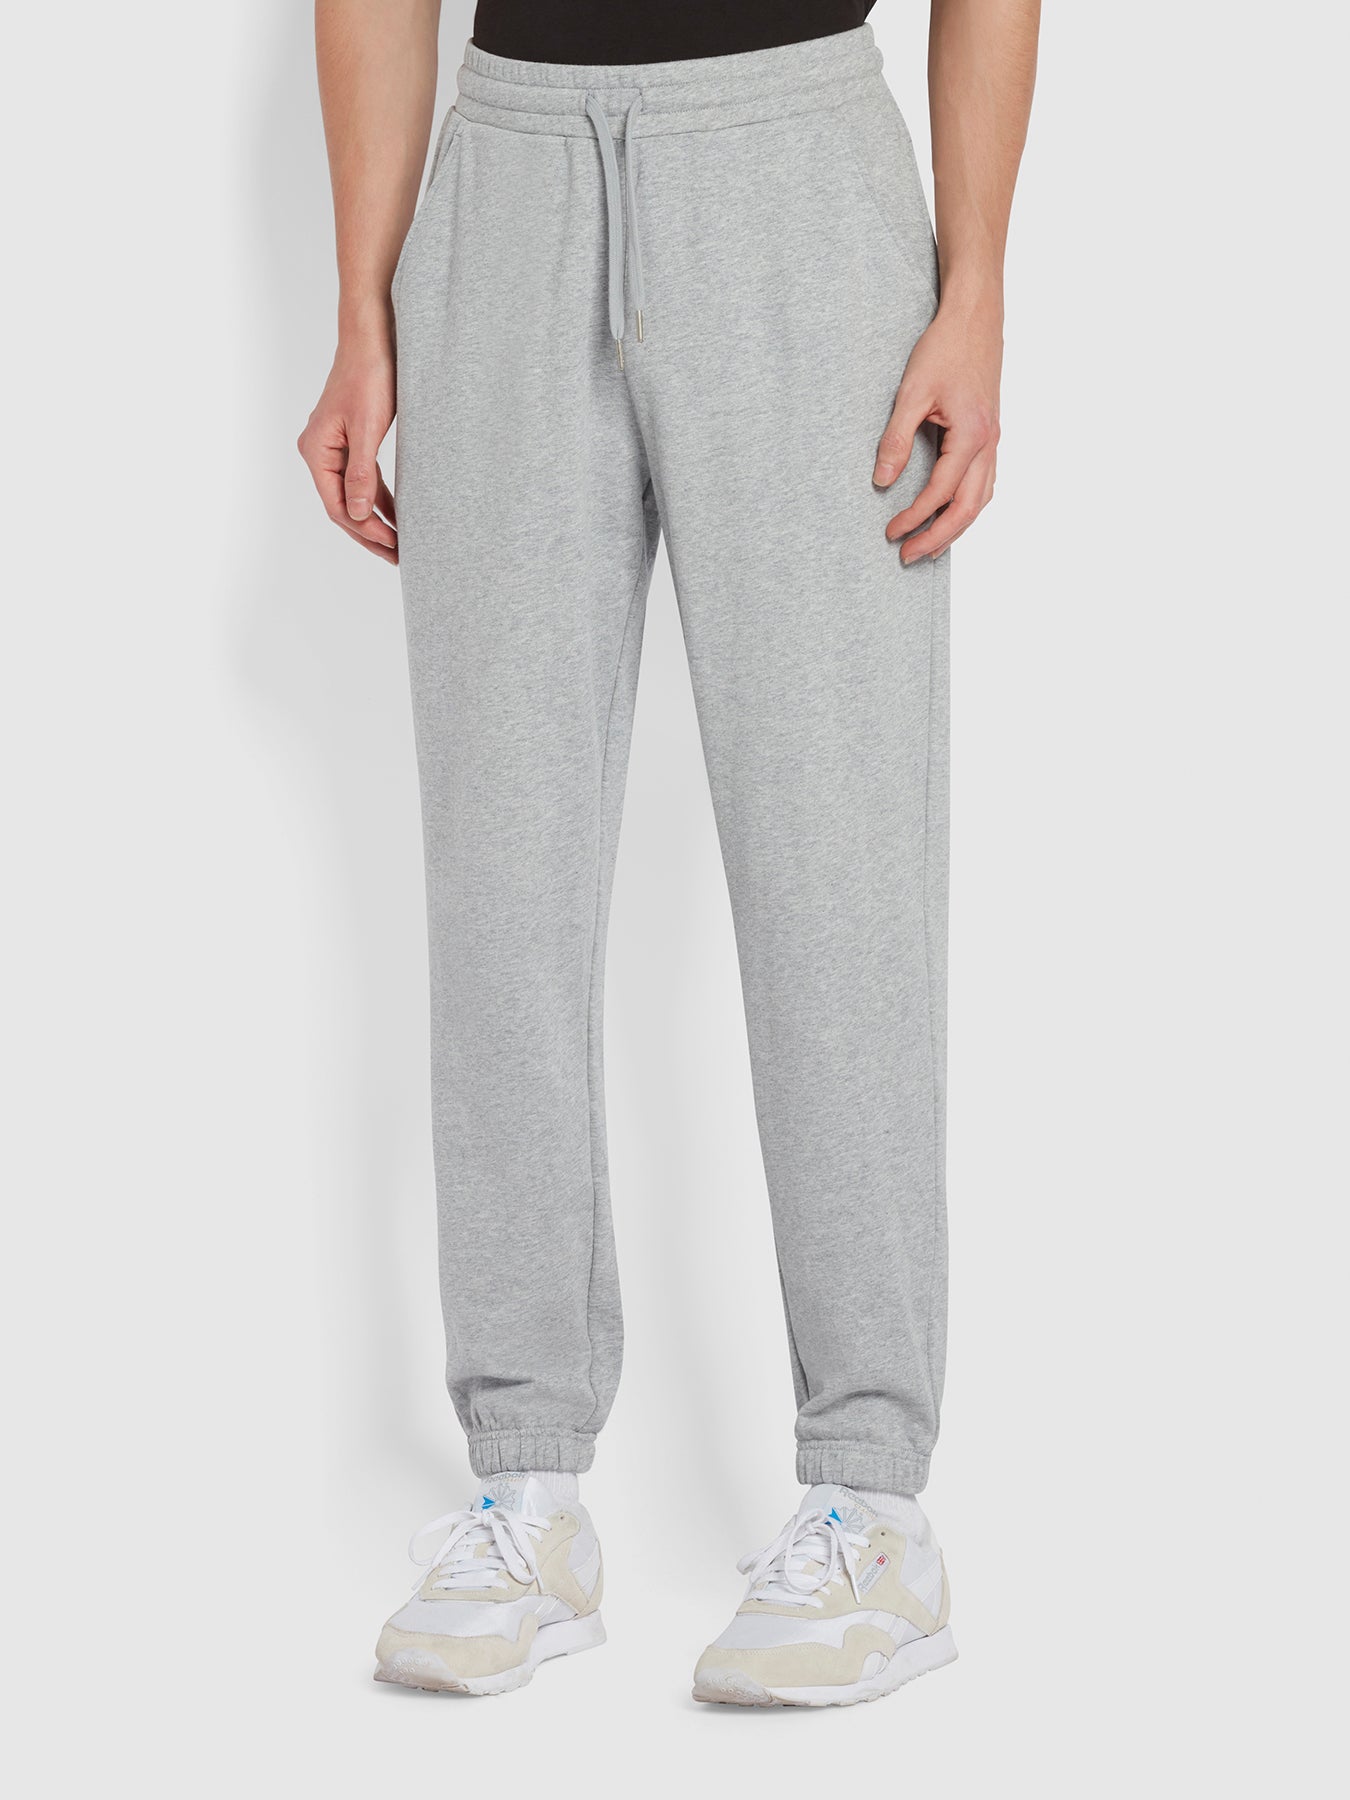 View Durrington Tall Fit Organic Cotton Jogger In Light Grey Marl information